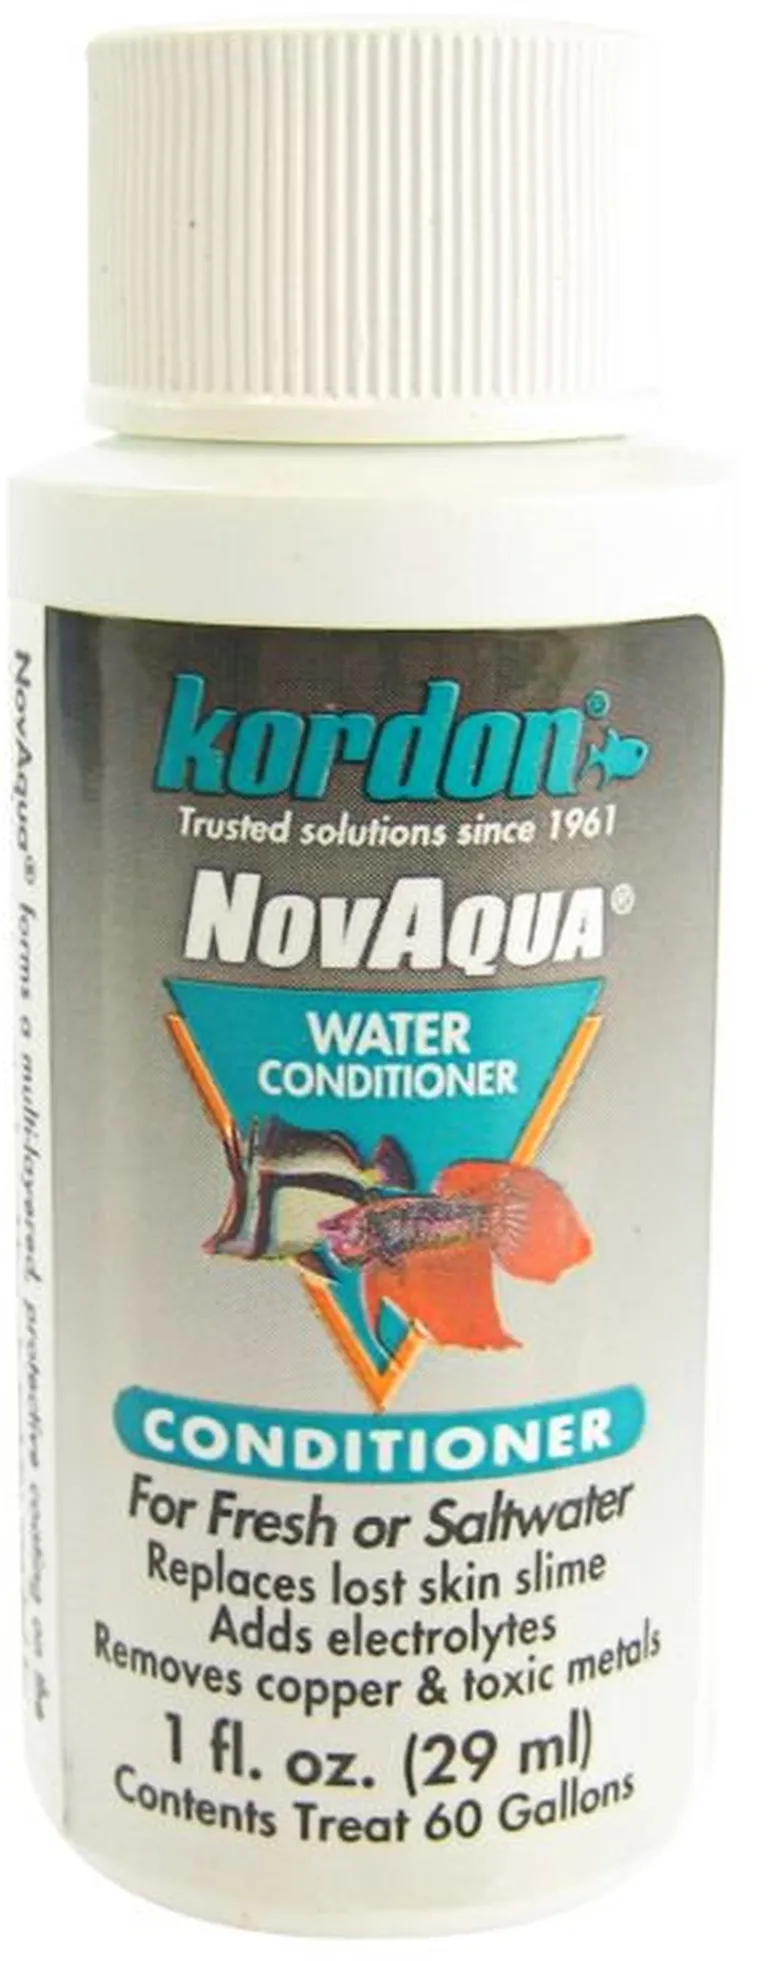 Kordon NovAqua Water Conditioner for Freshwater and Saltwater Aquariums Photo 1